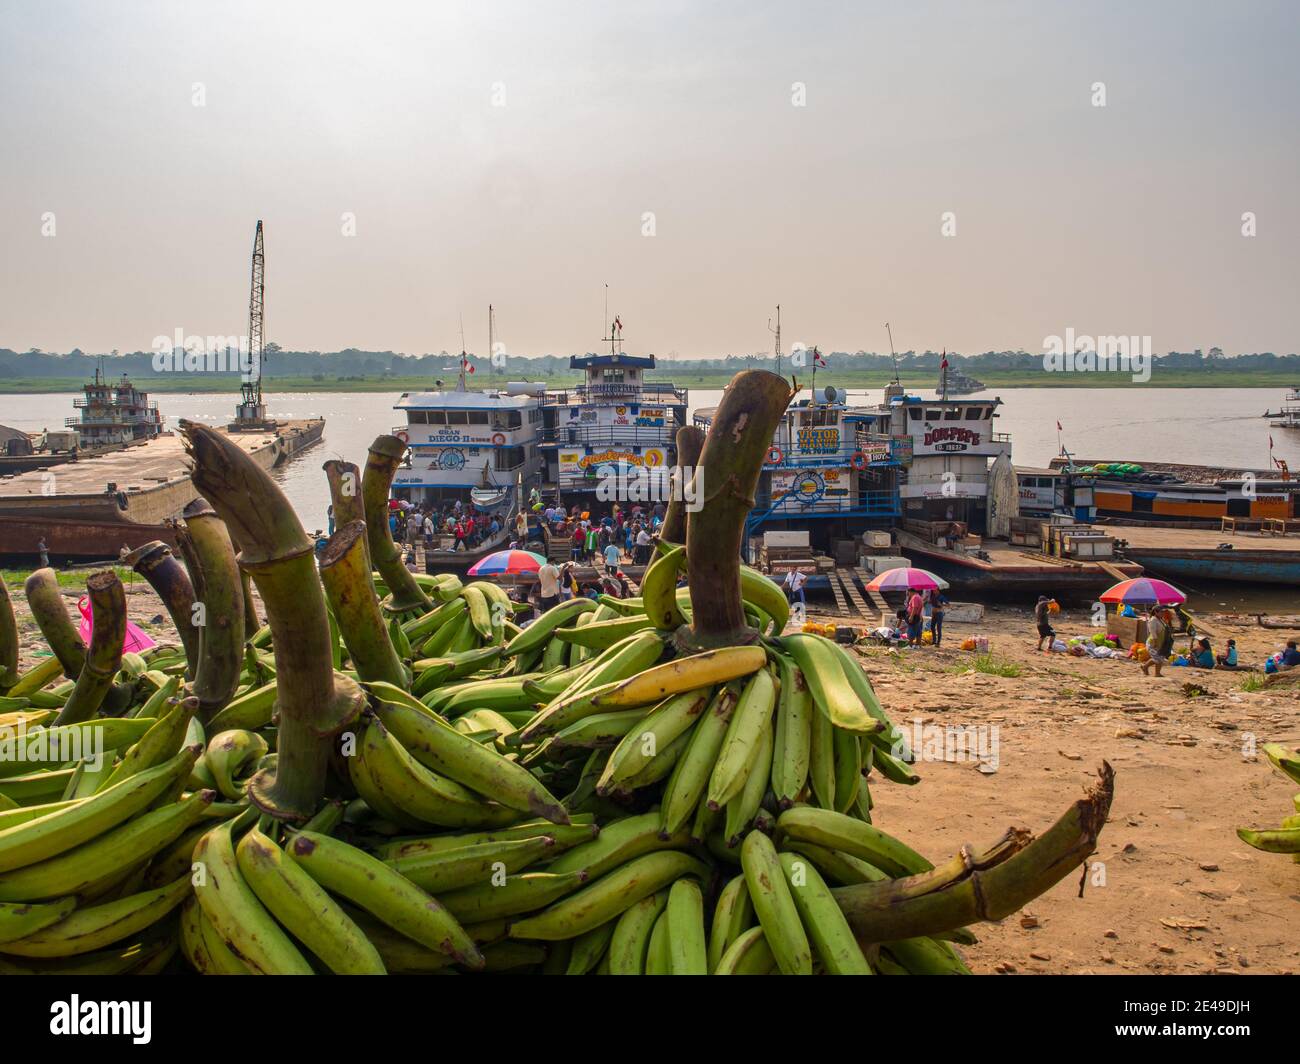 Iquitos, Peru - May 13, 2016: A lot of bananas in a port of Iquitos on Amazon River. Amazonia Latin America. Stock Photo